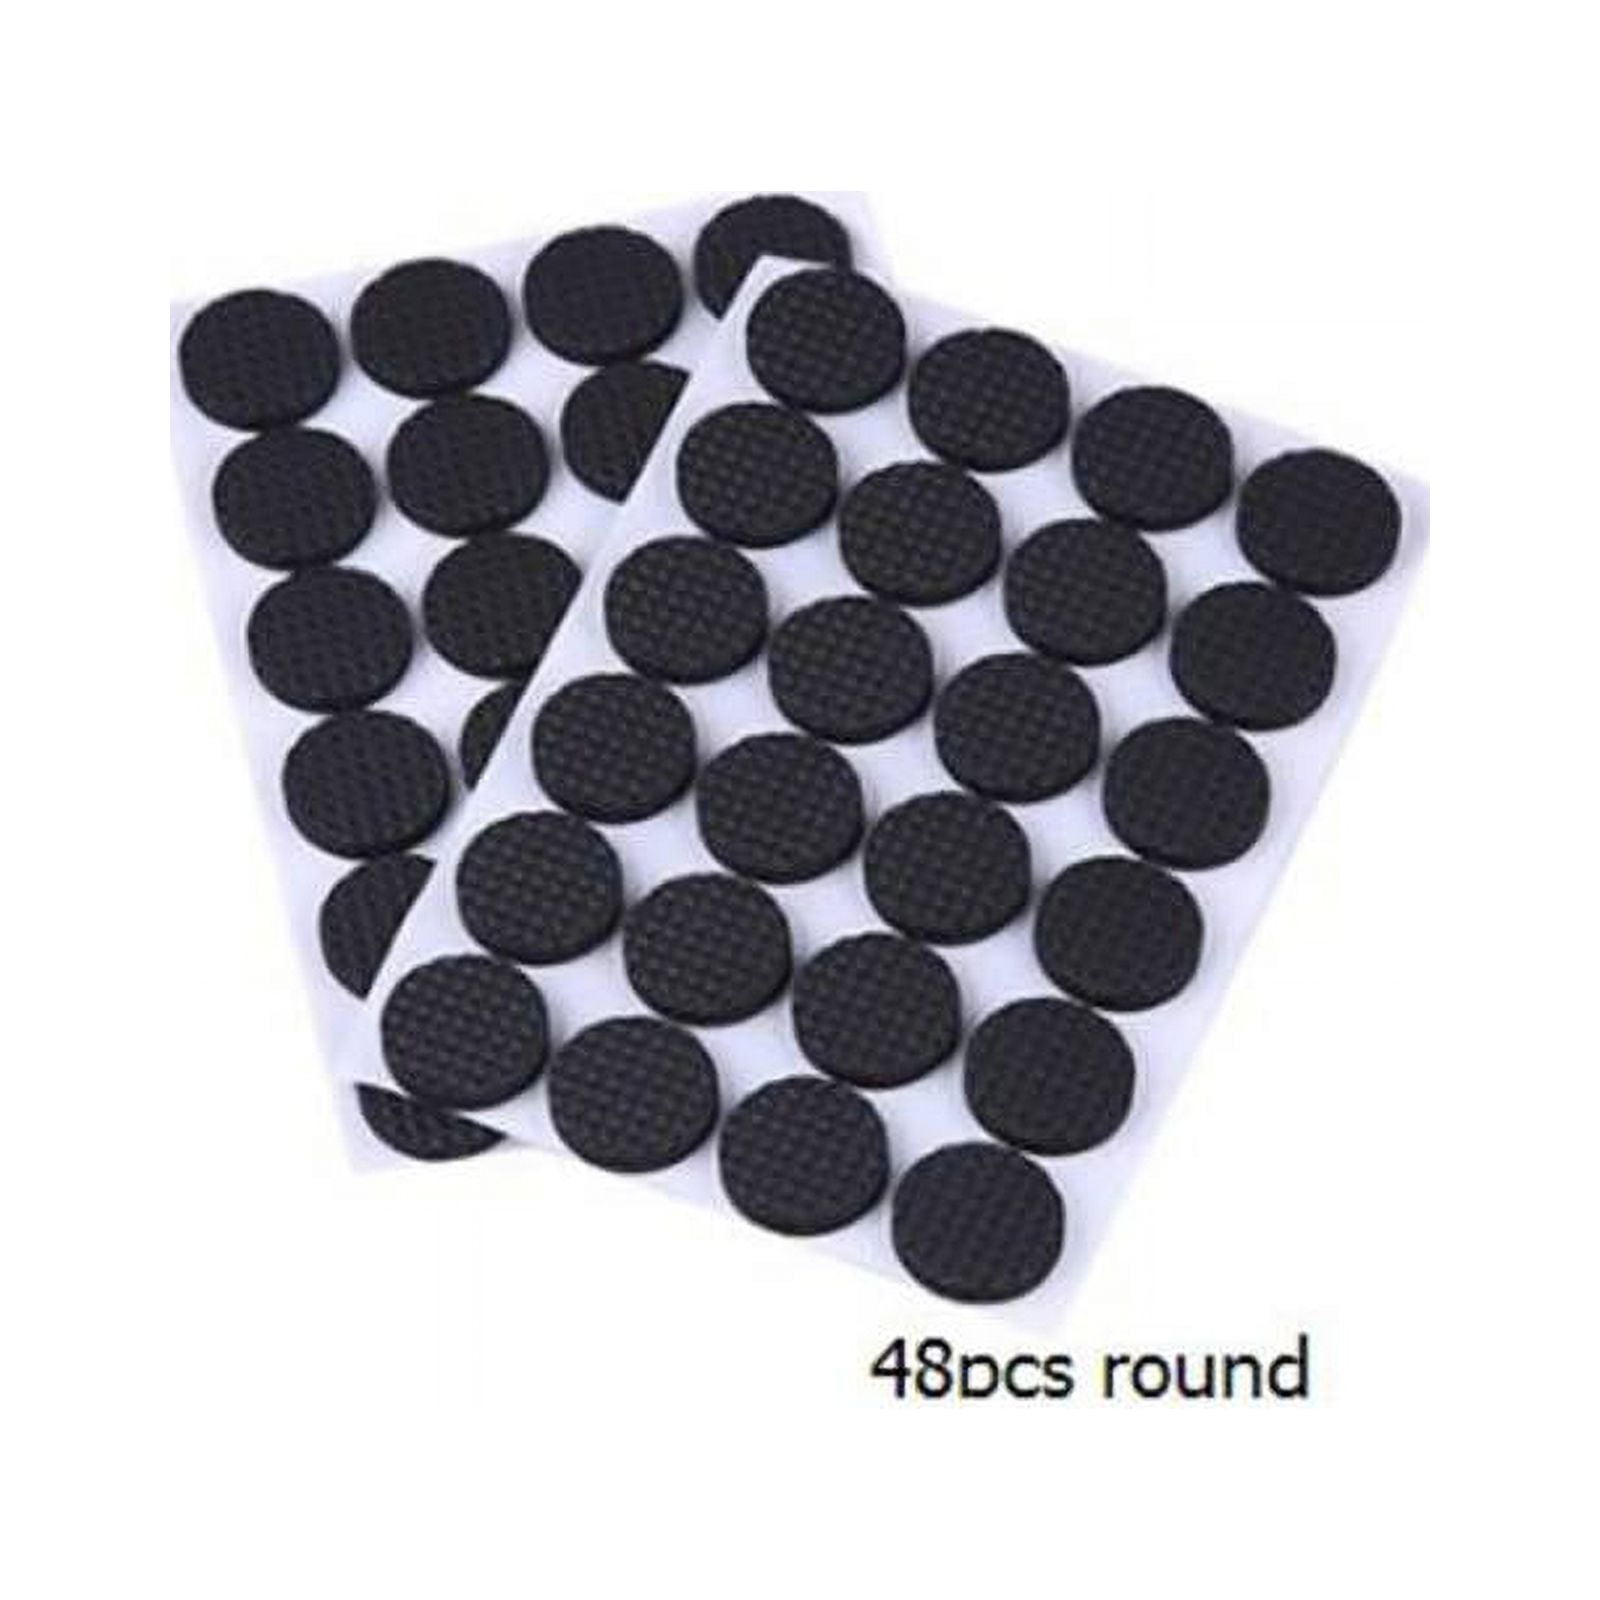 Gorillapads Cb144 Non Slip Furniture Pads/Grippers (Set Of 16) Furniture  Feet Floor Protectors, 2 Inch Round, Black